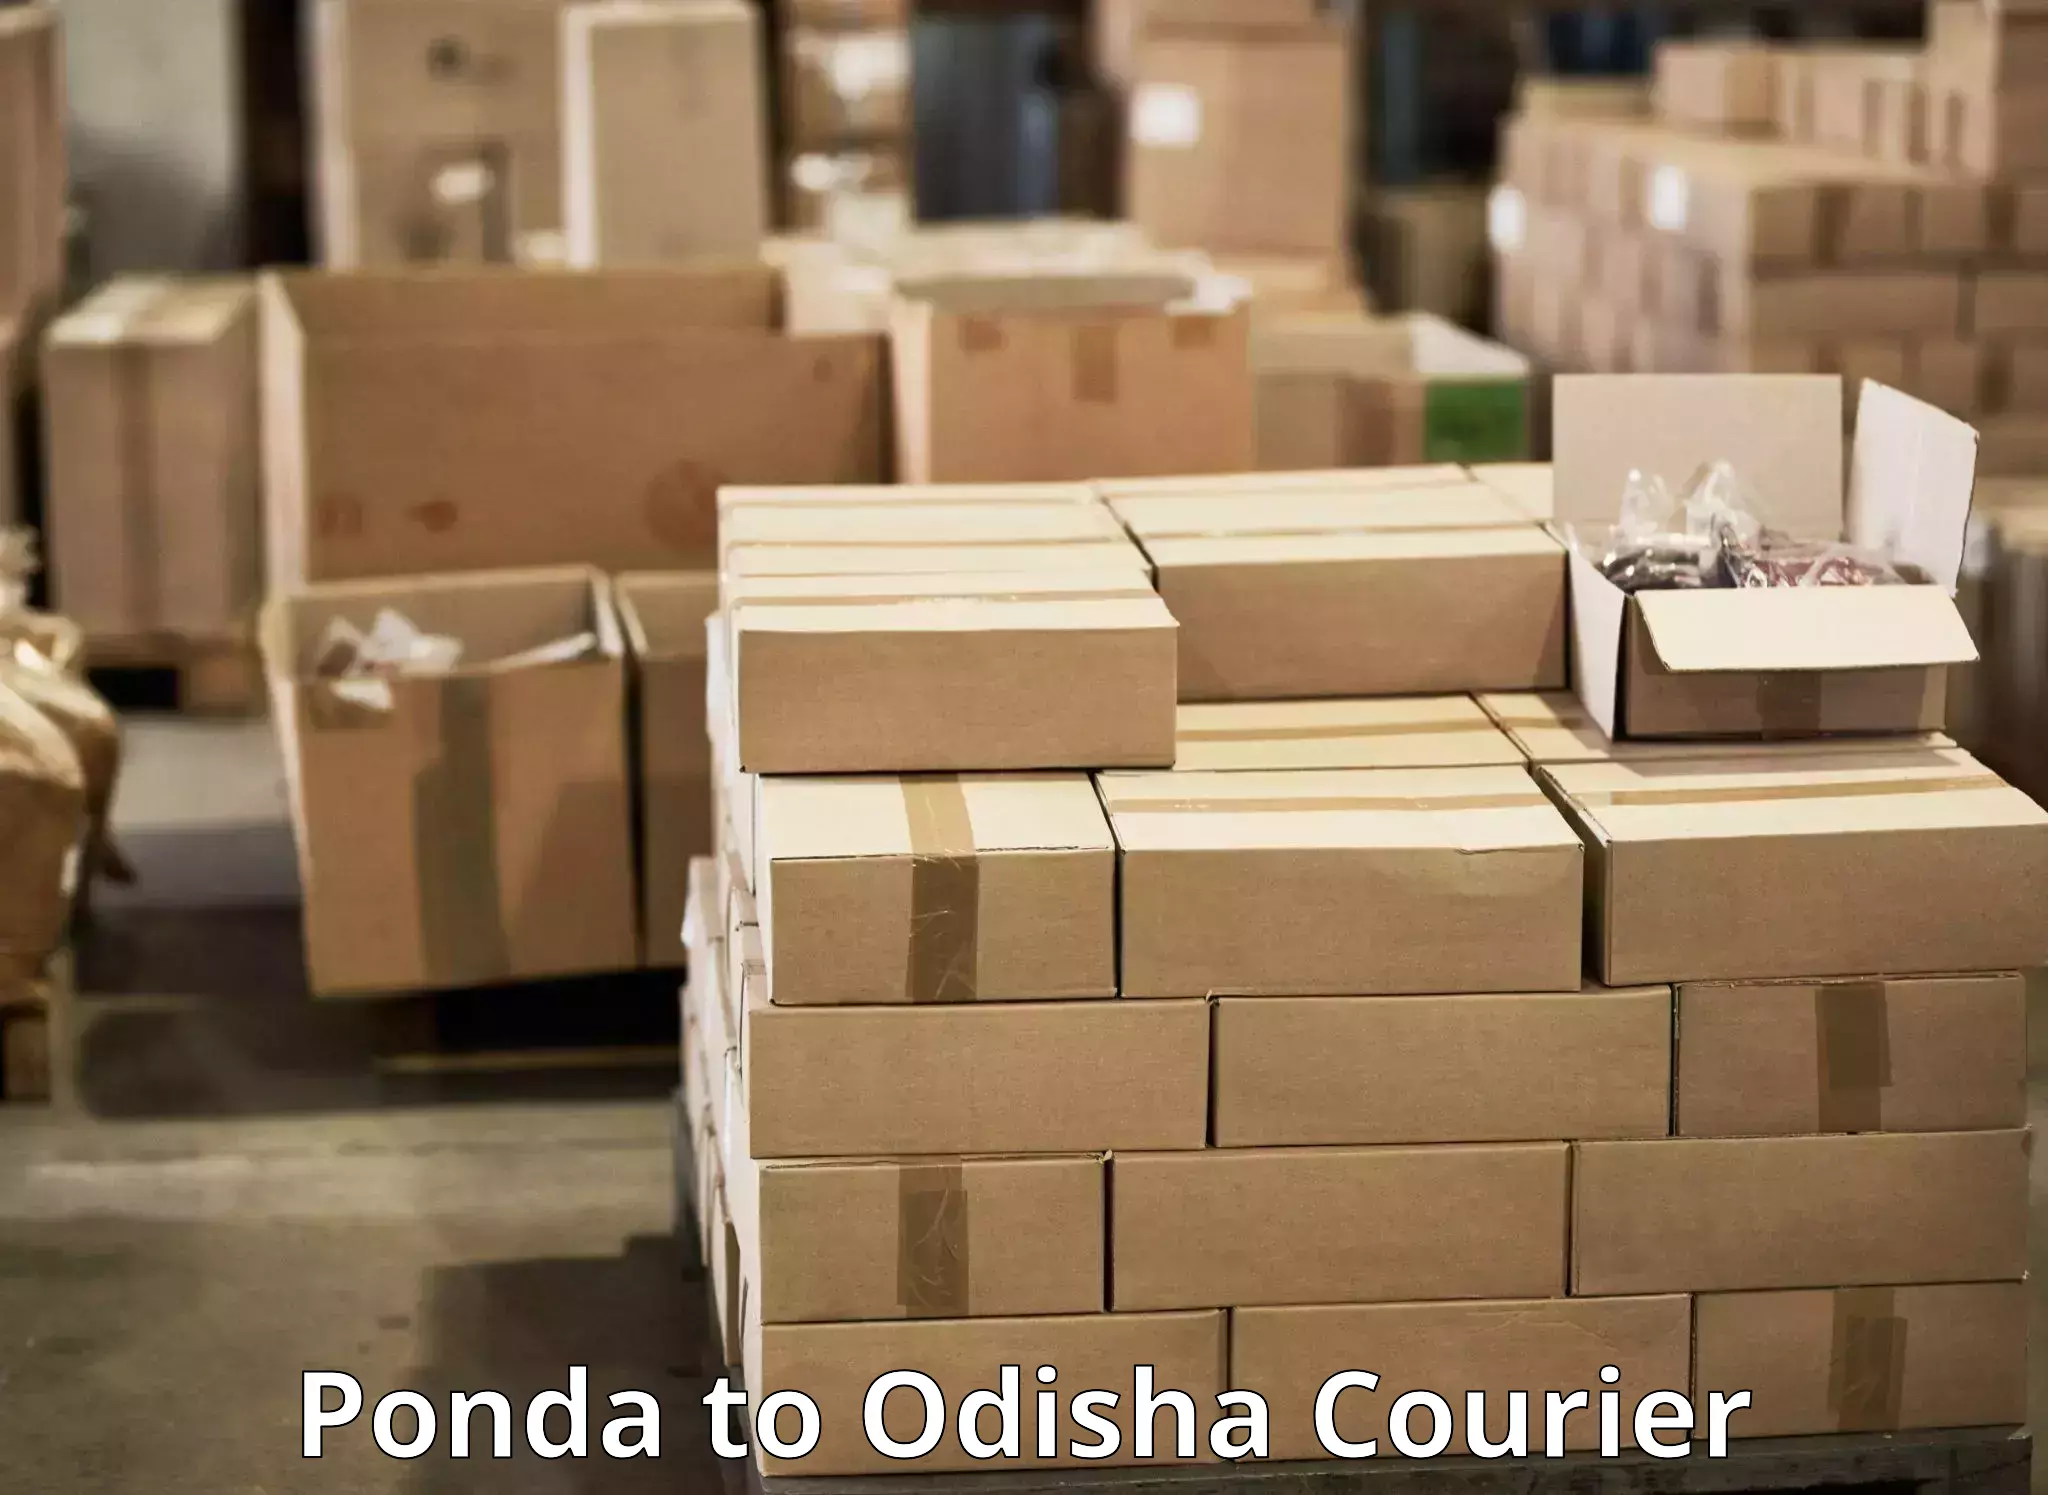 Round-the-clock parcel delivery in Ponda to Jajpur